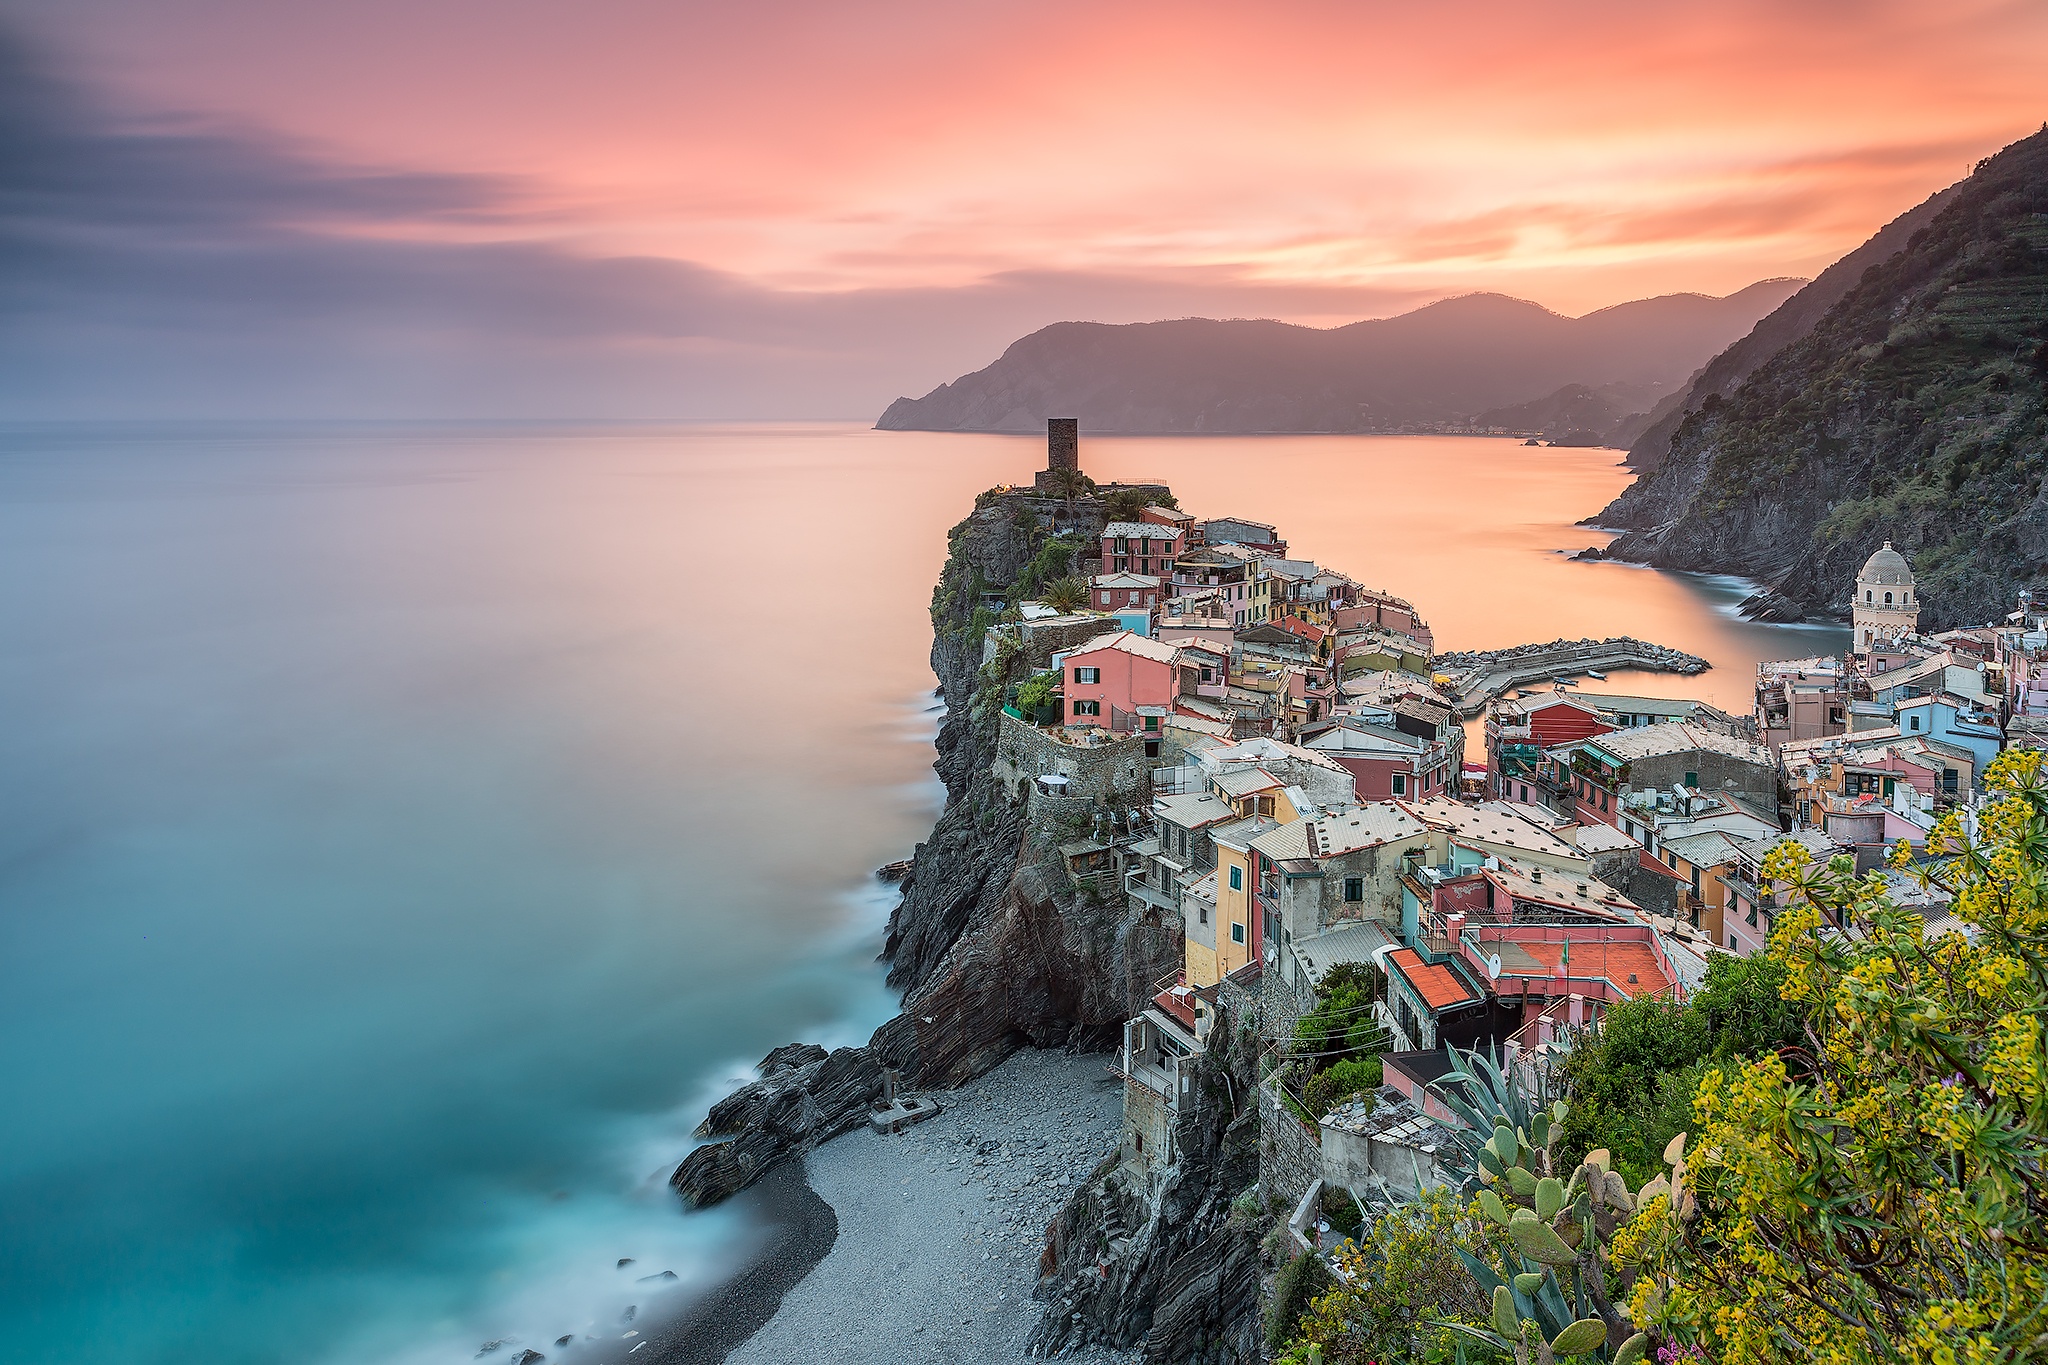 A Day In The Life Of Seascape Photographer Francesco Gola